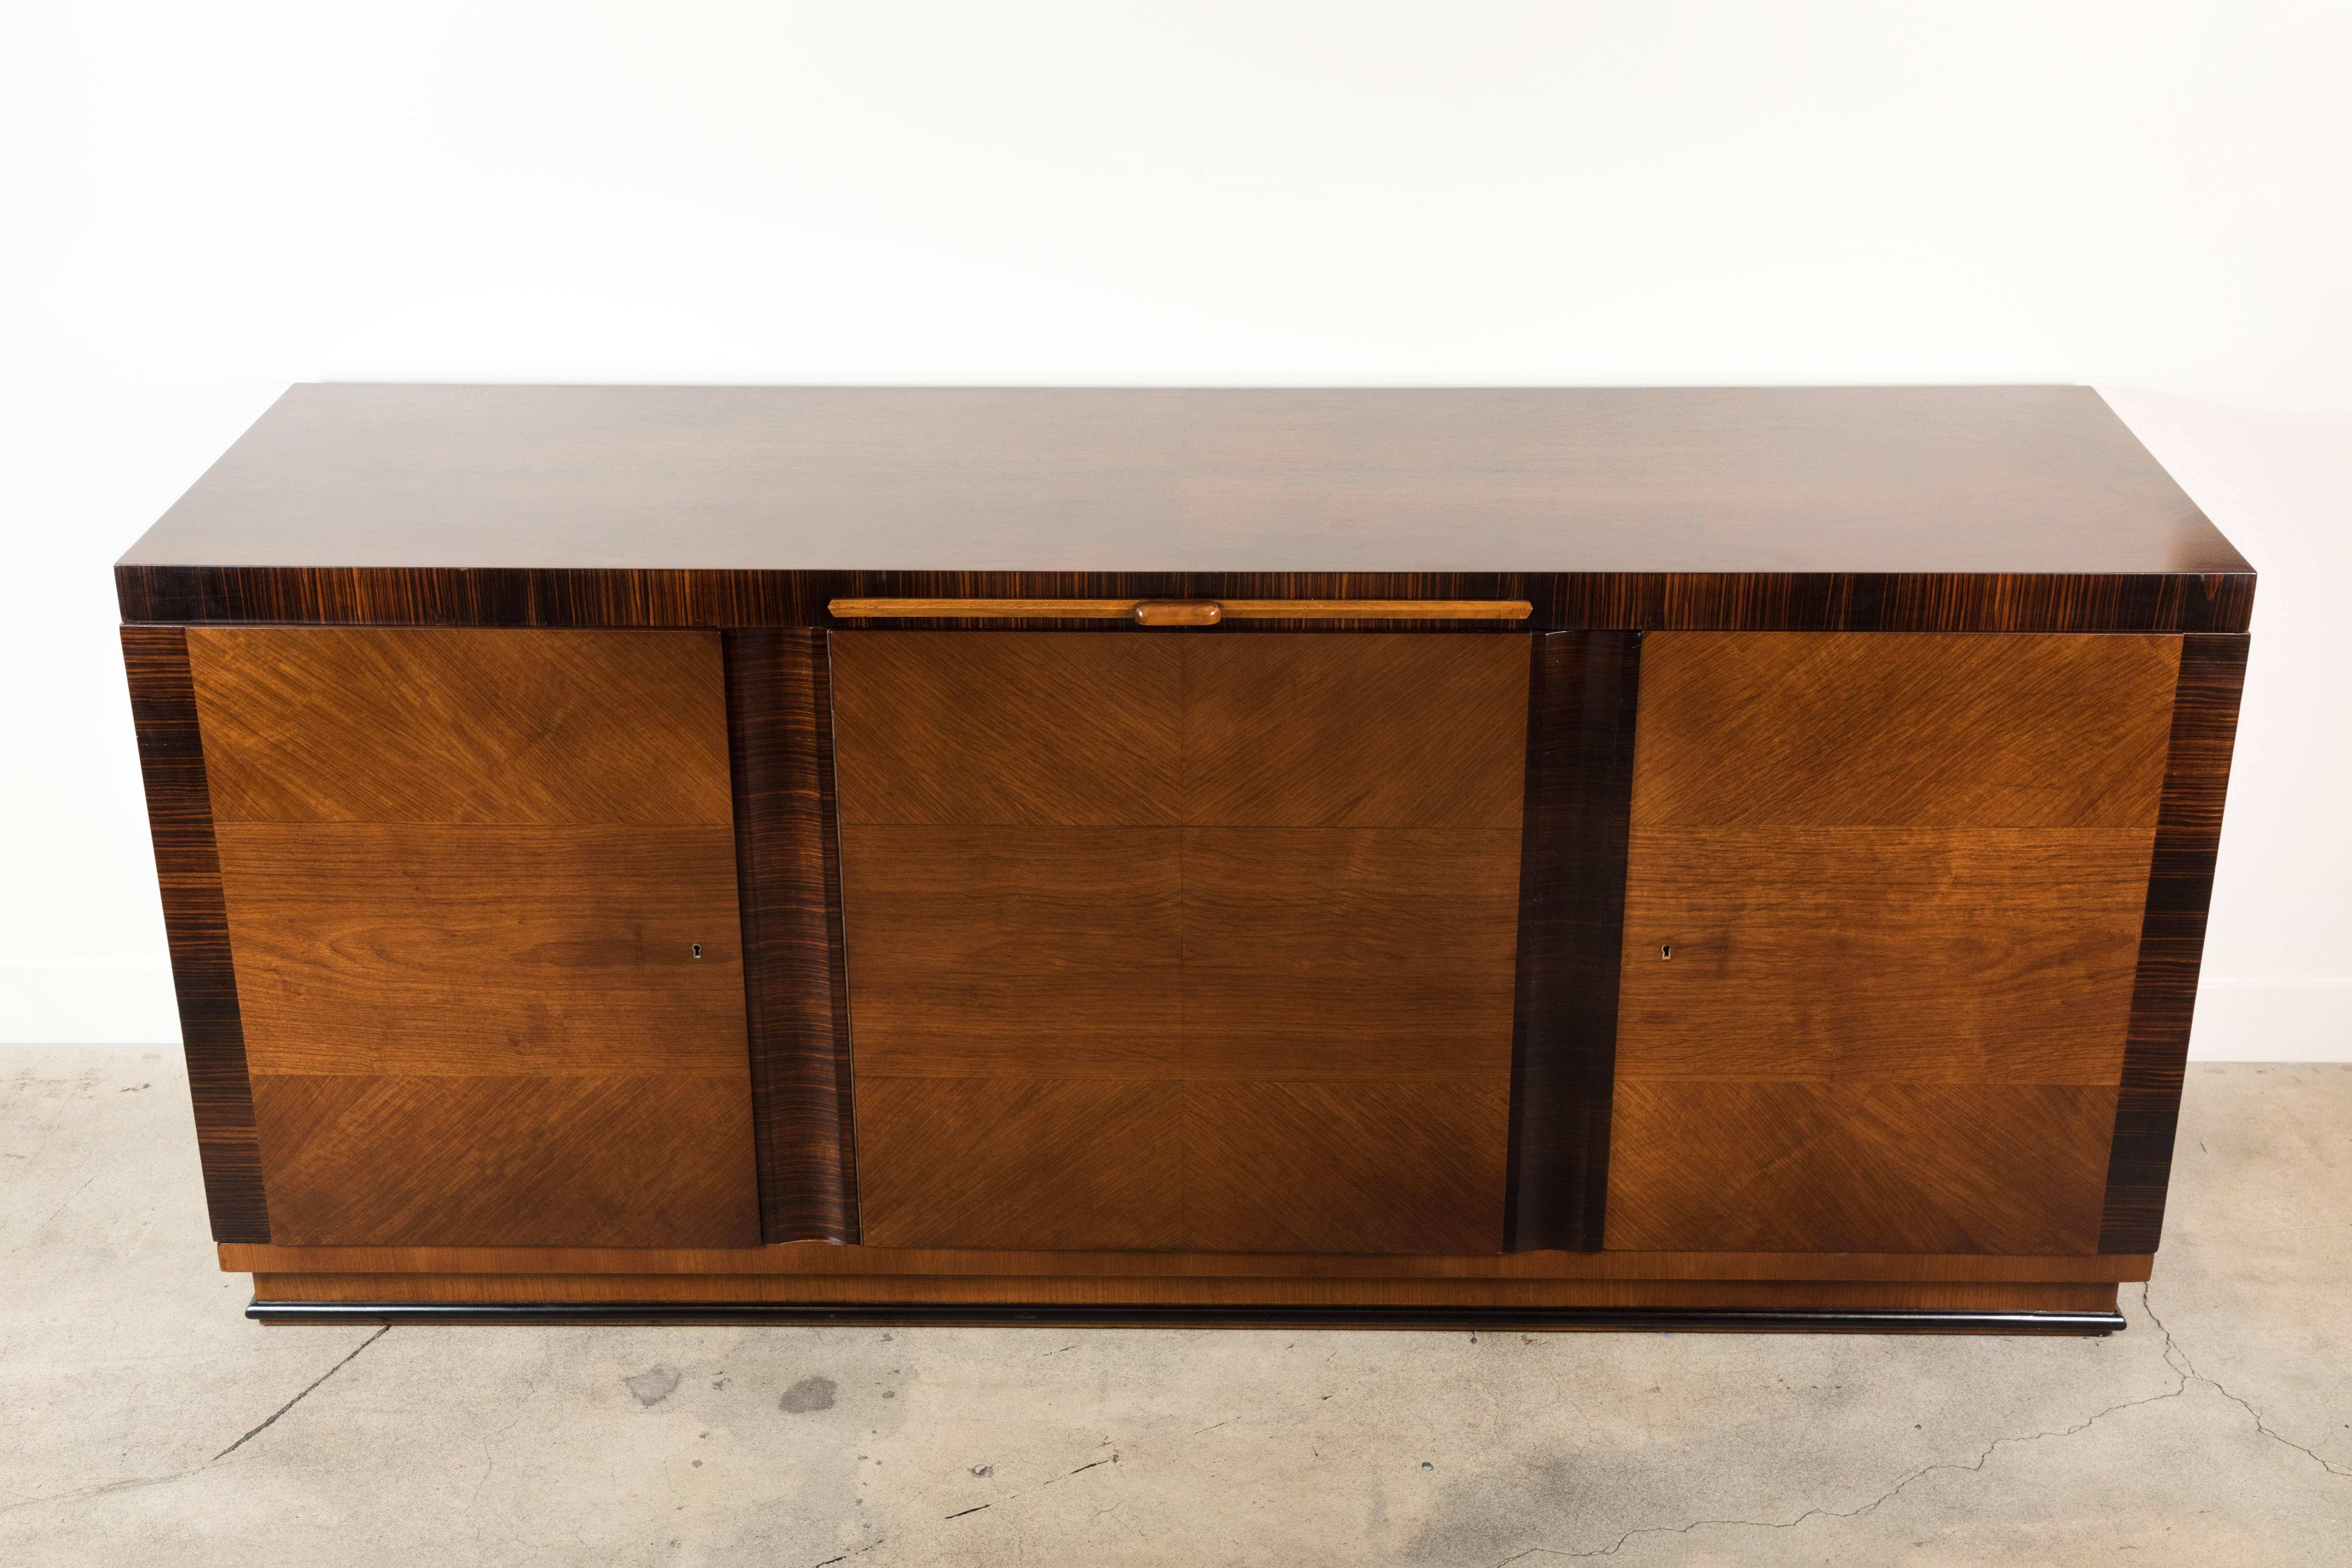 German Art Deco rosewood and fruitwood sideboard with pull-out marble topped server.